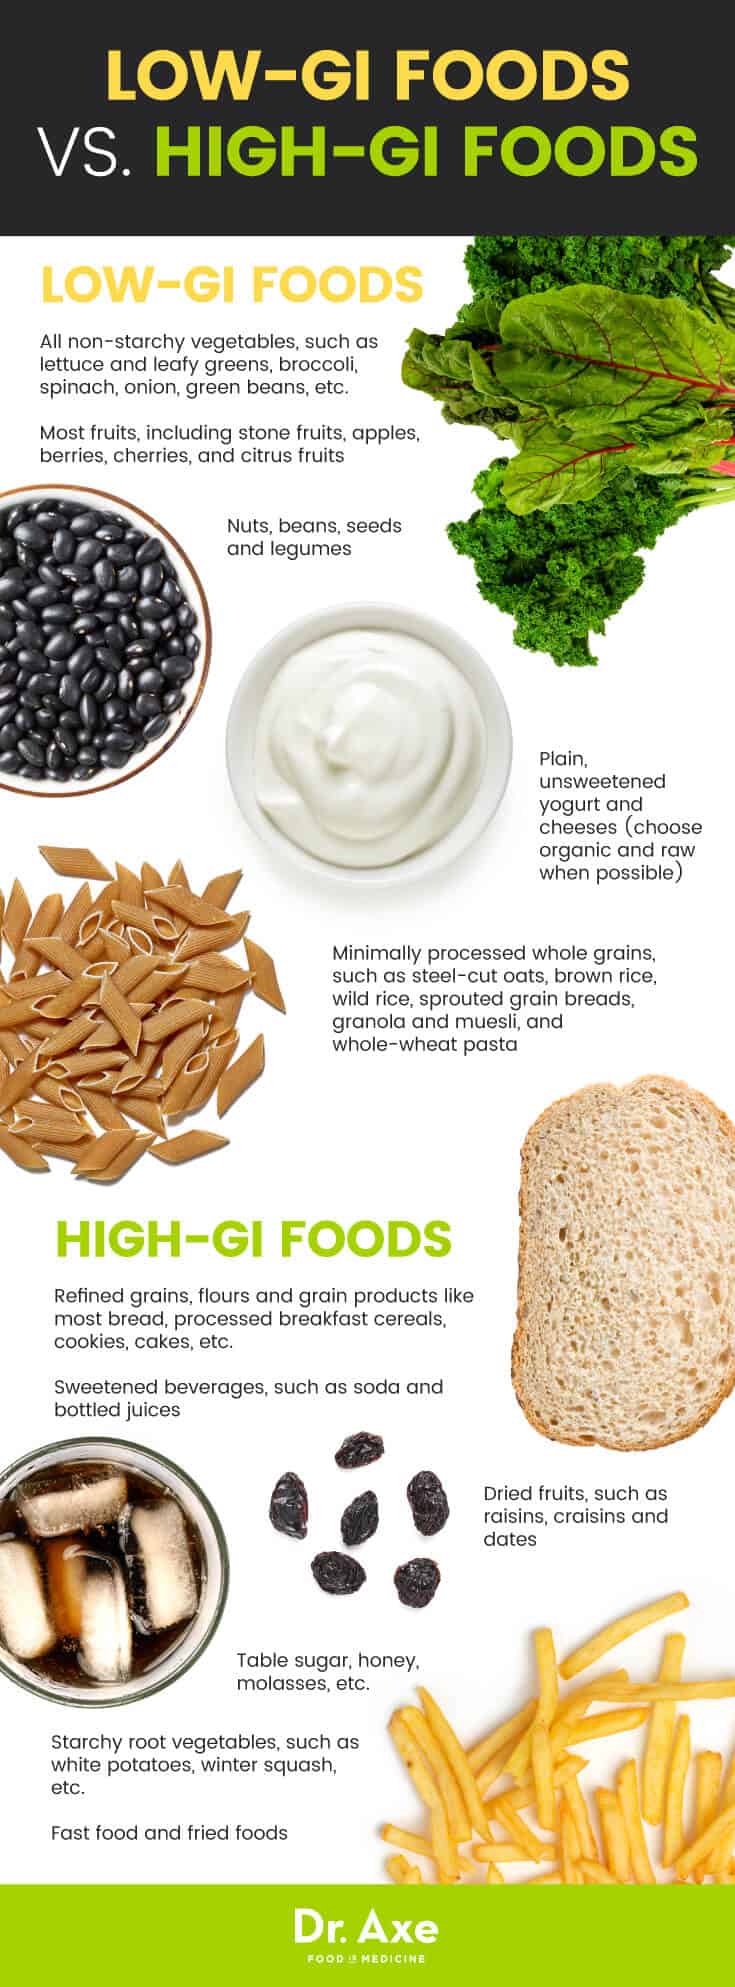 Low-glycemic foods vs. high-glycemic foods - Dr. Axe